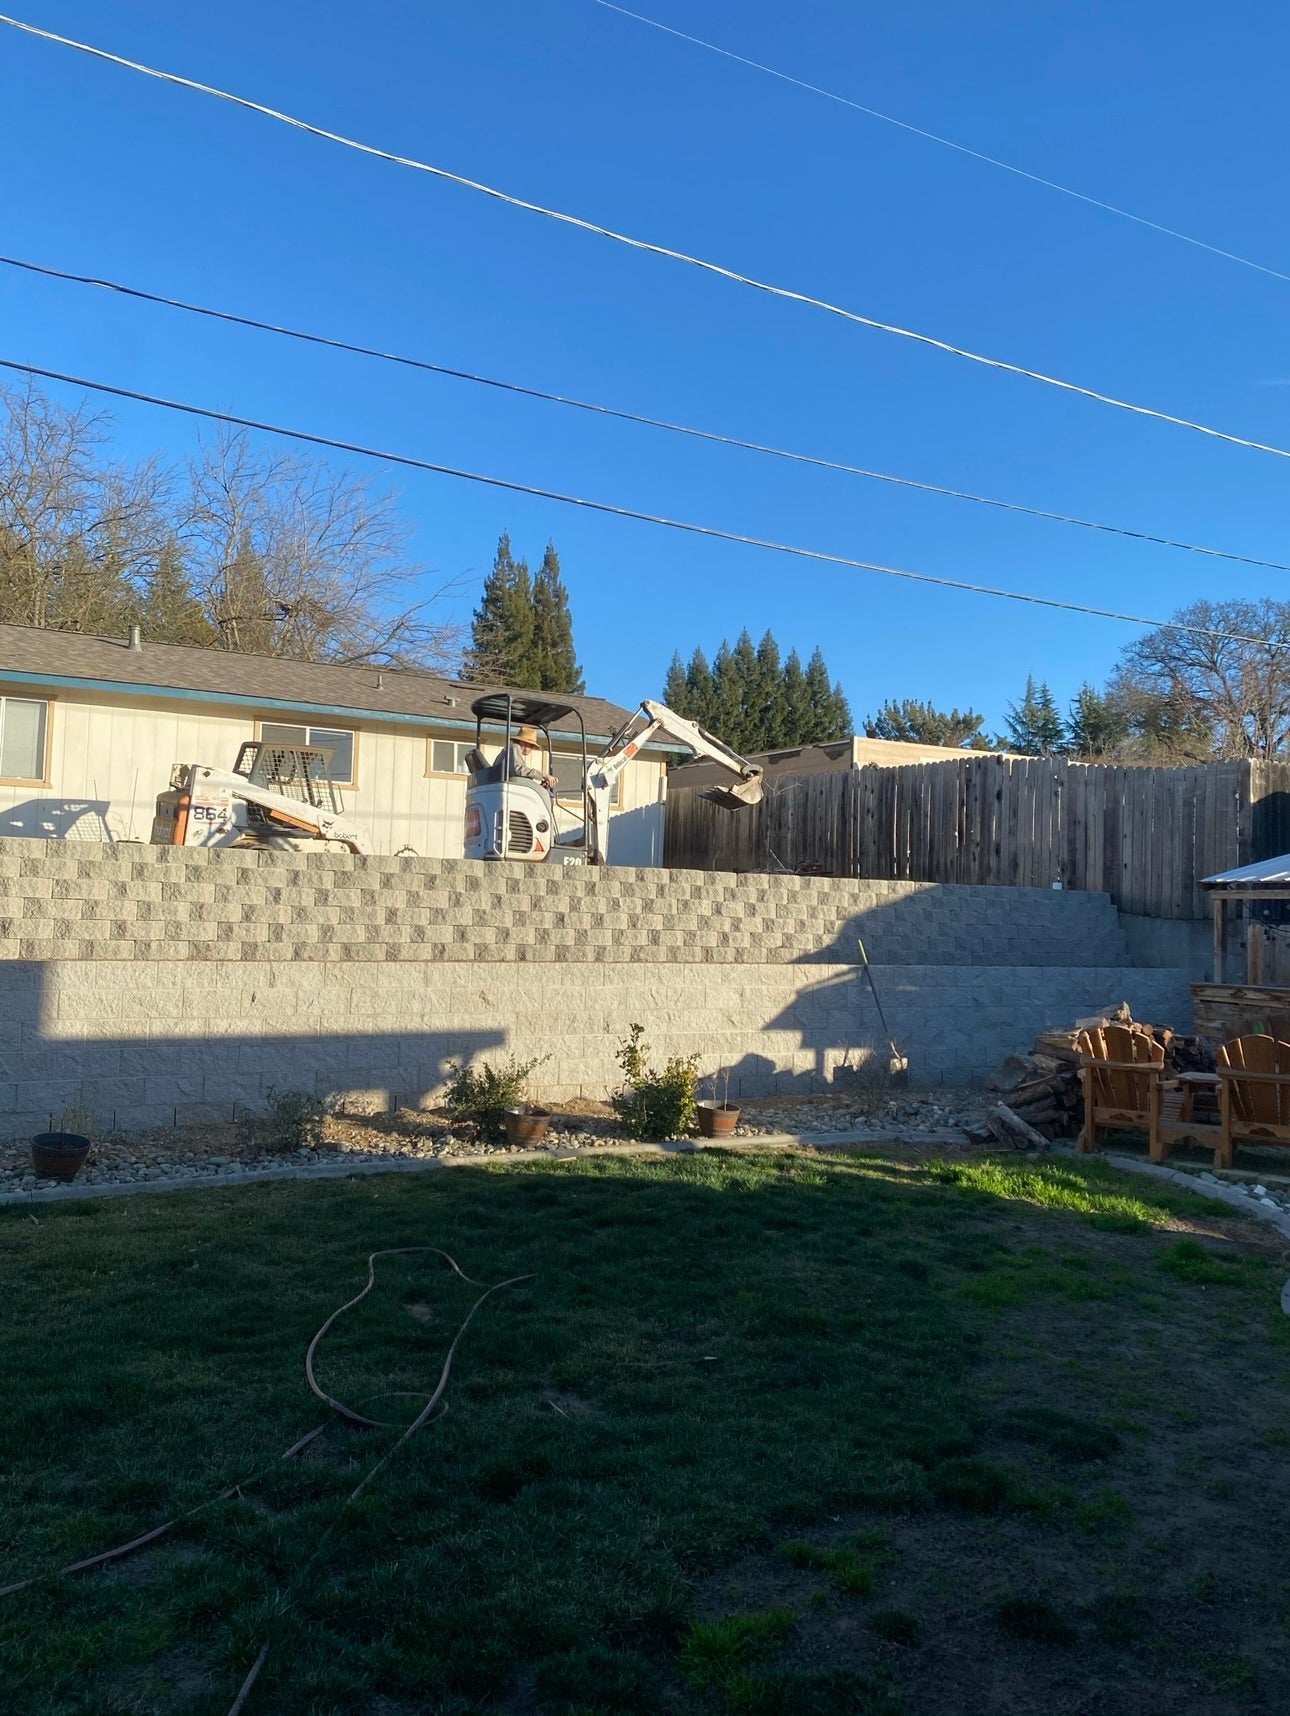 Steve Project - Tree Removal, Retaining Wall, & Fence Work